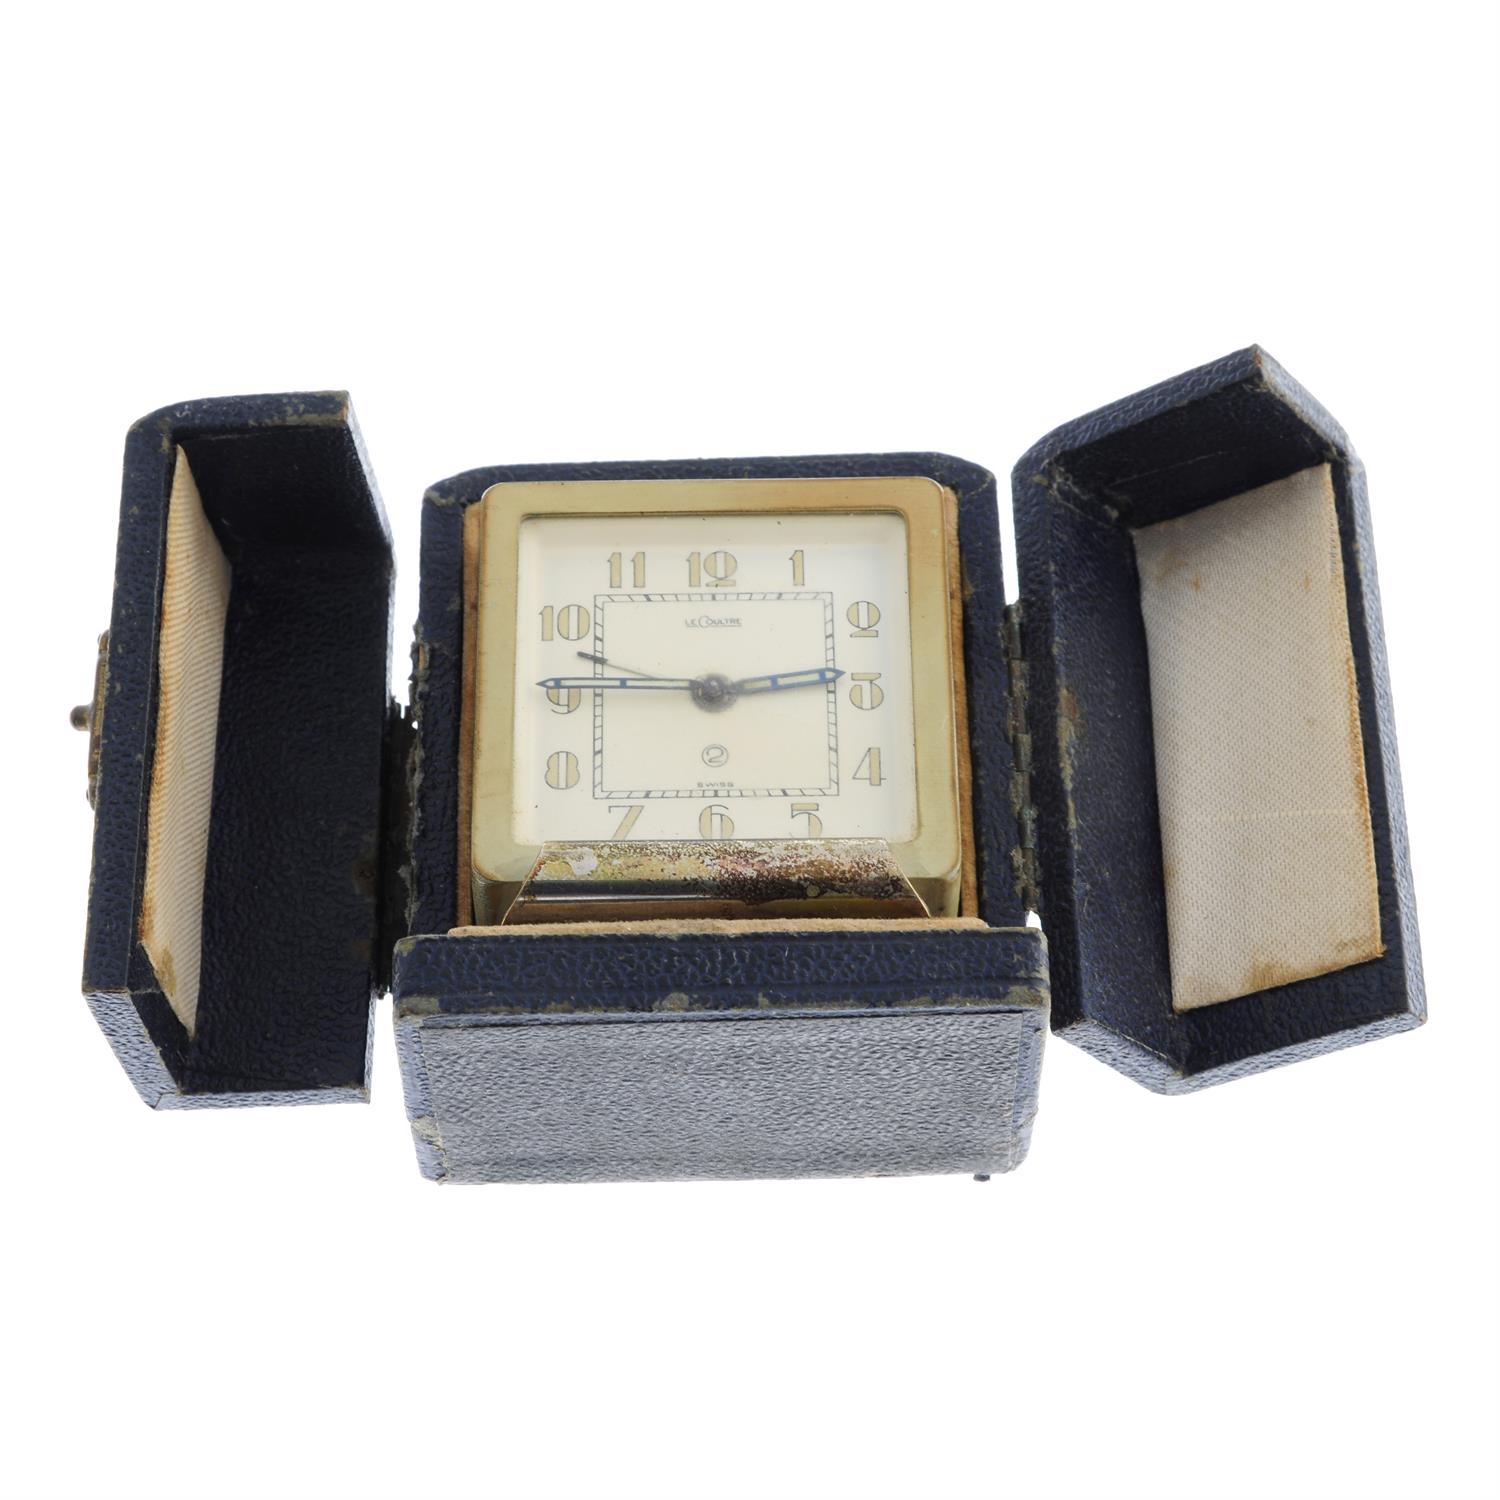 LeCoultre - a travel alarm clock, 55mm. - Image 3 of 3